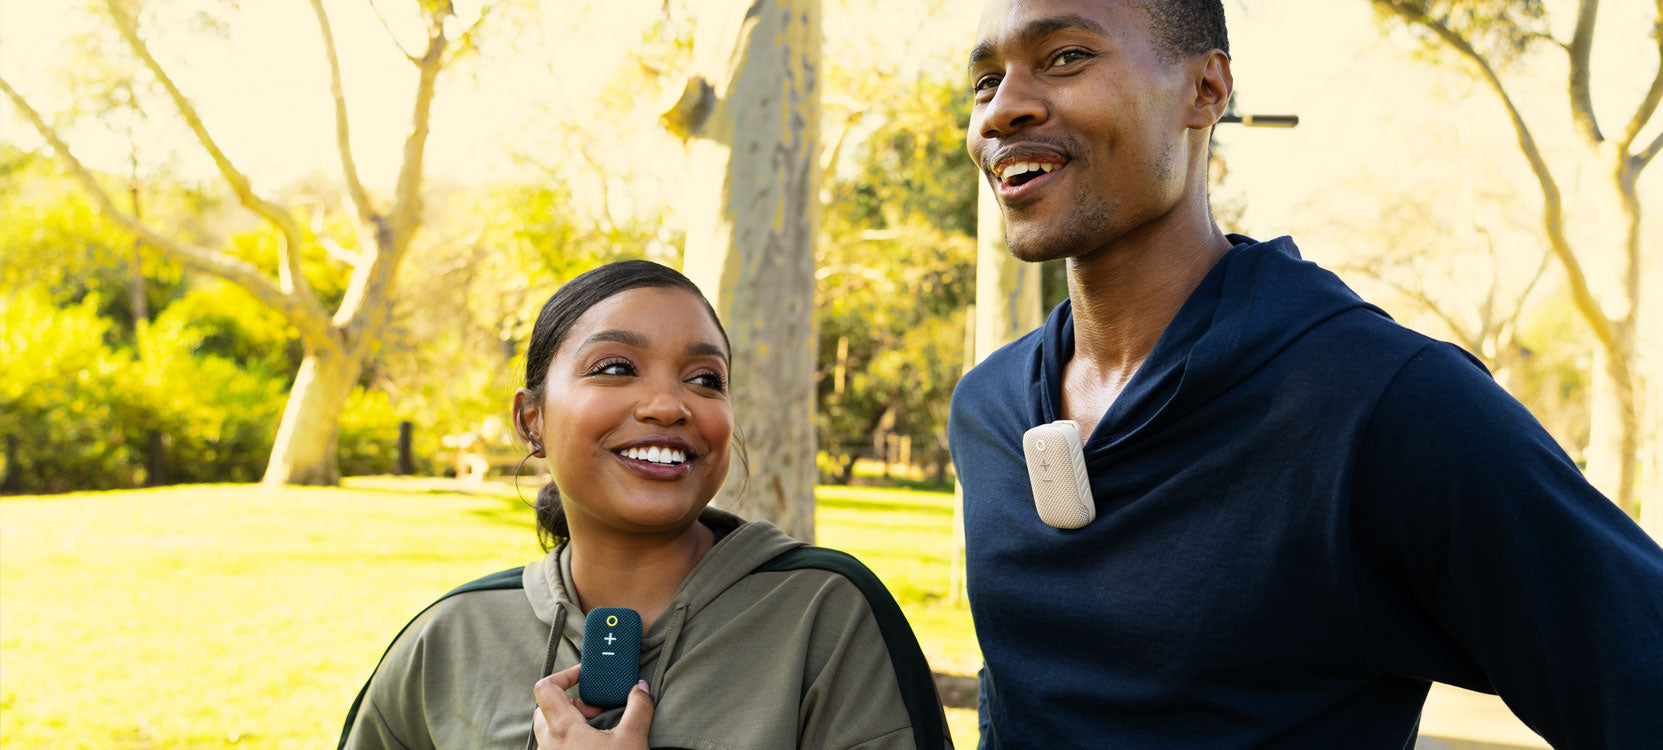 Two people running outdoors in a sunny park, one of them holding a smartphone and both wearing earpieces, smiling and talking while enjoying a jog together.